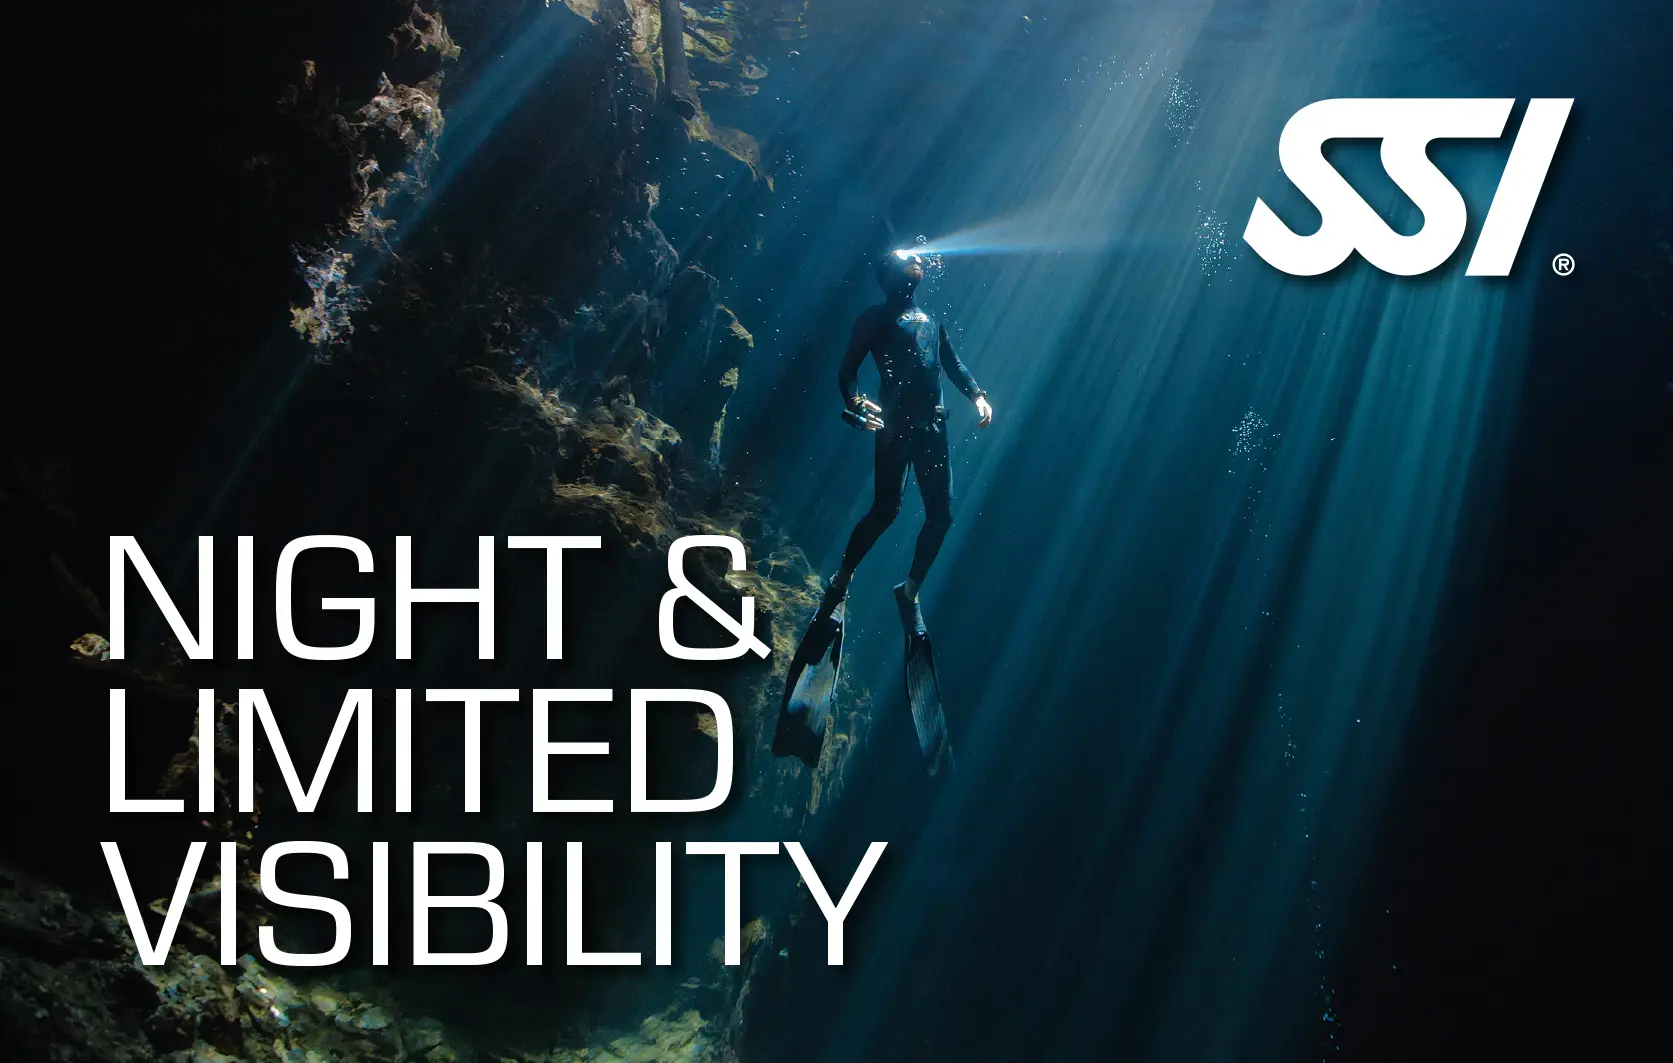 SSI Night & Limited Visibility Course